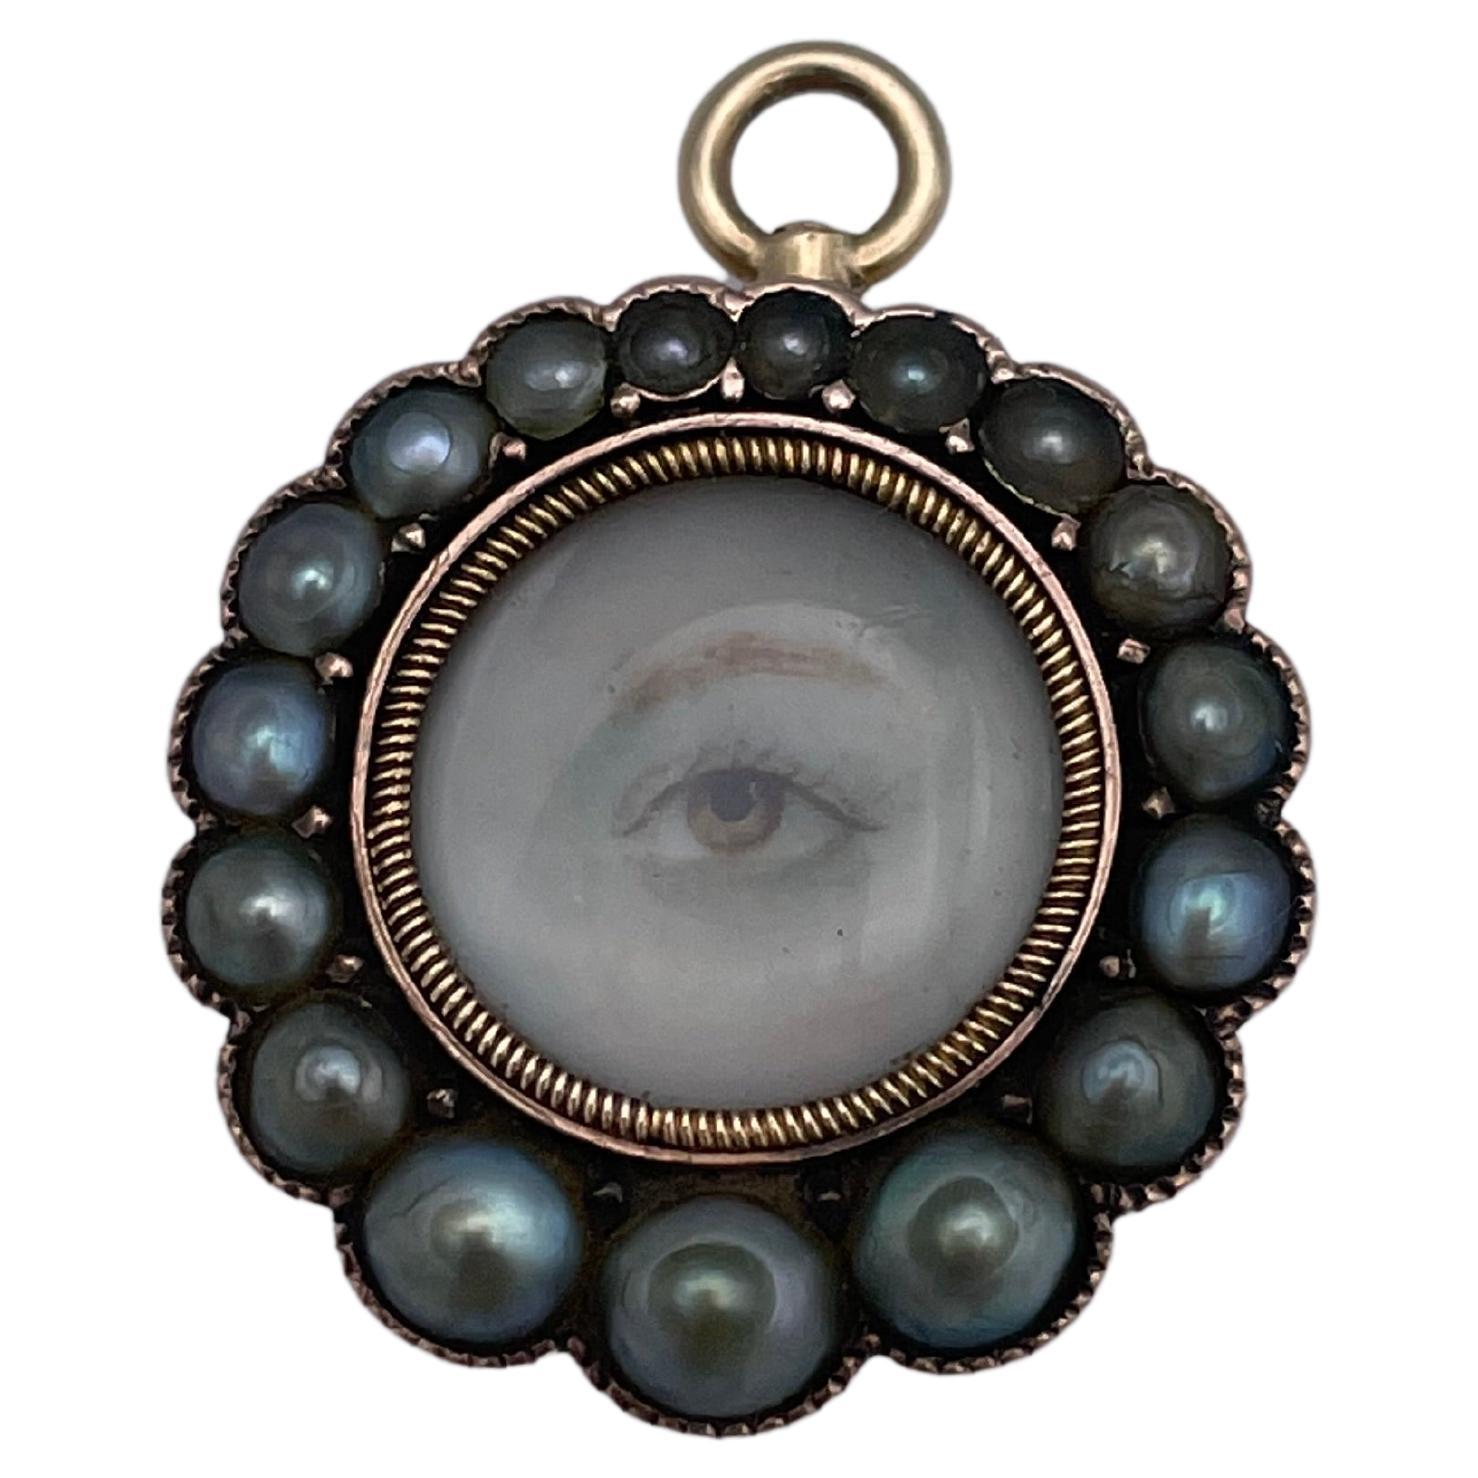 Most charming and endearing Lady's Eye miniature pendant.  Locket back.  Rose gold. Circular, with border of natural pearls.  These are all the original pearls, in graduated sizes.  Lovely clear hand-painted miniature portrait of a lady's eye, with